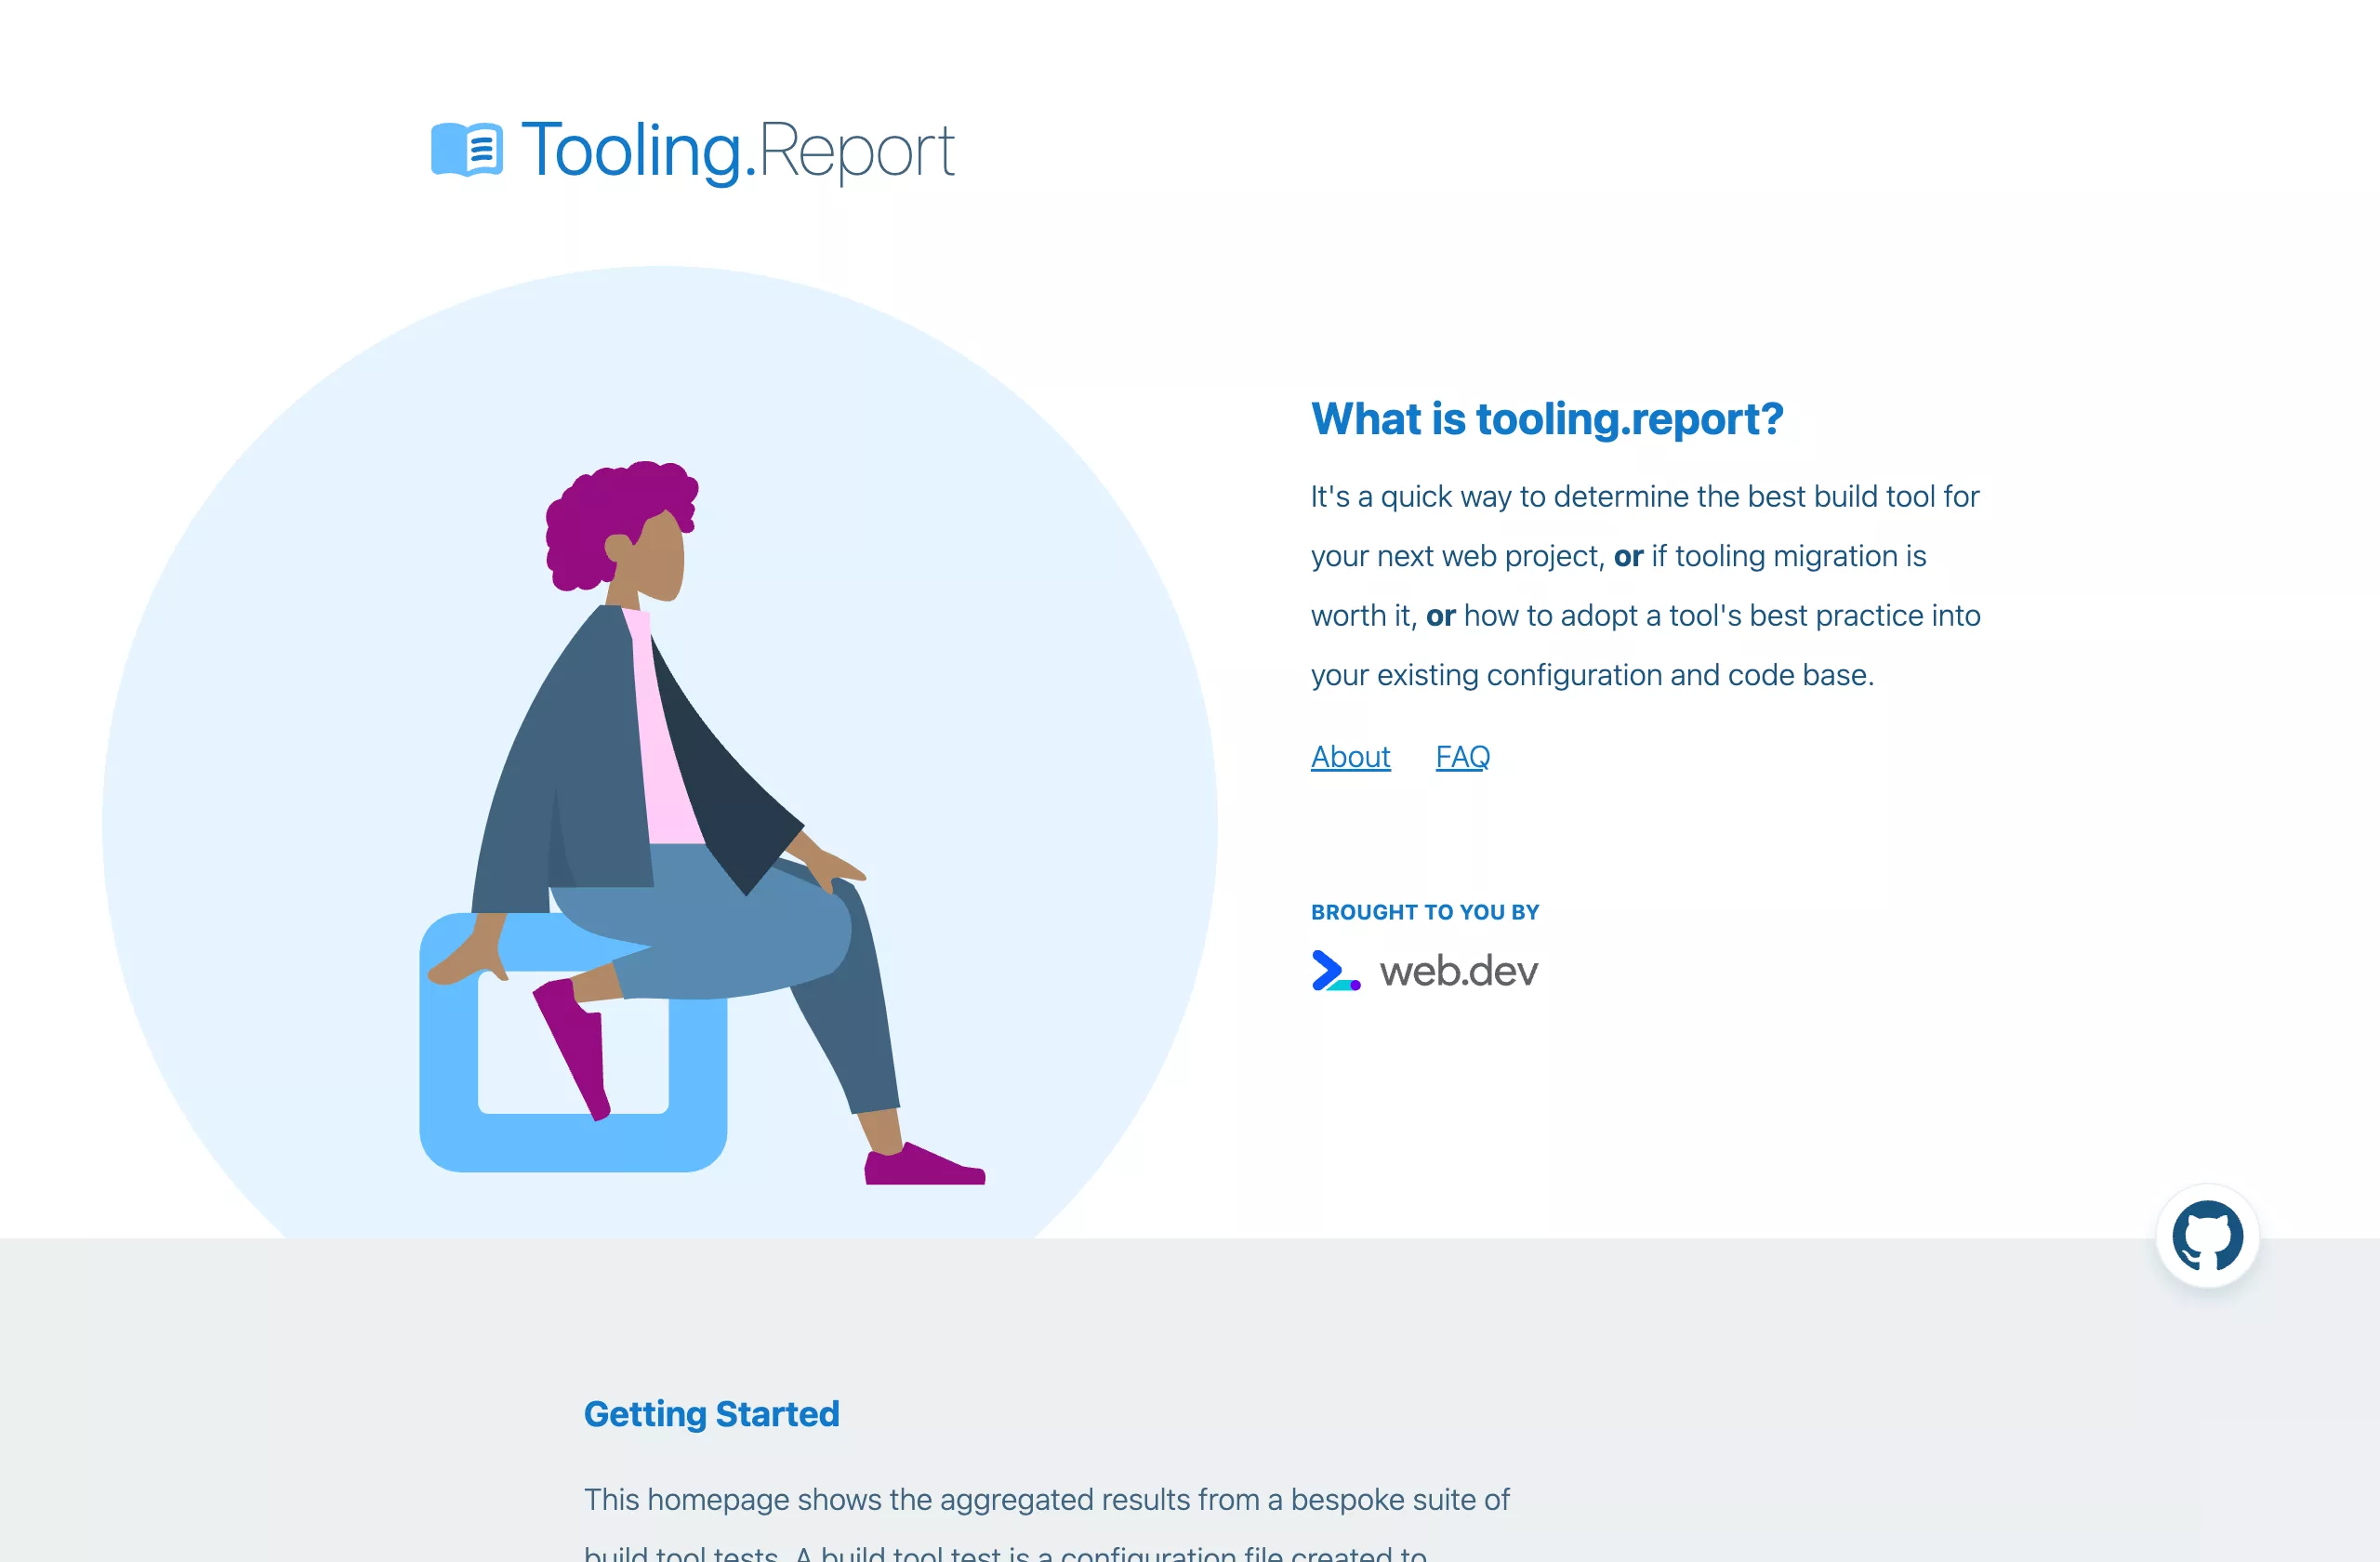 tooling.report